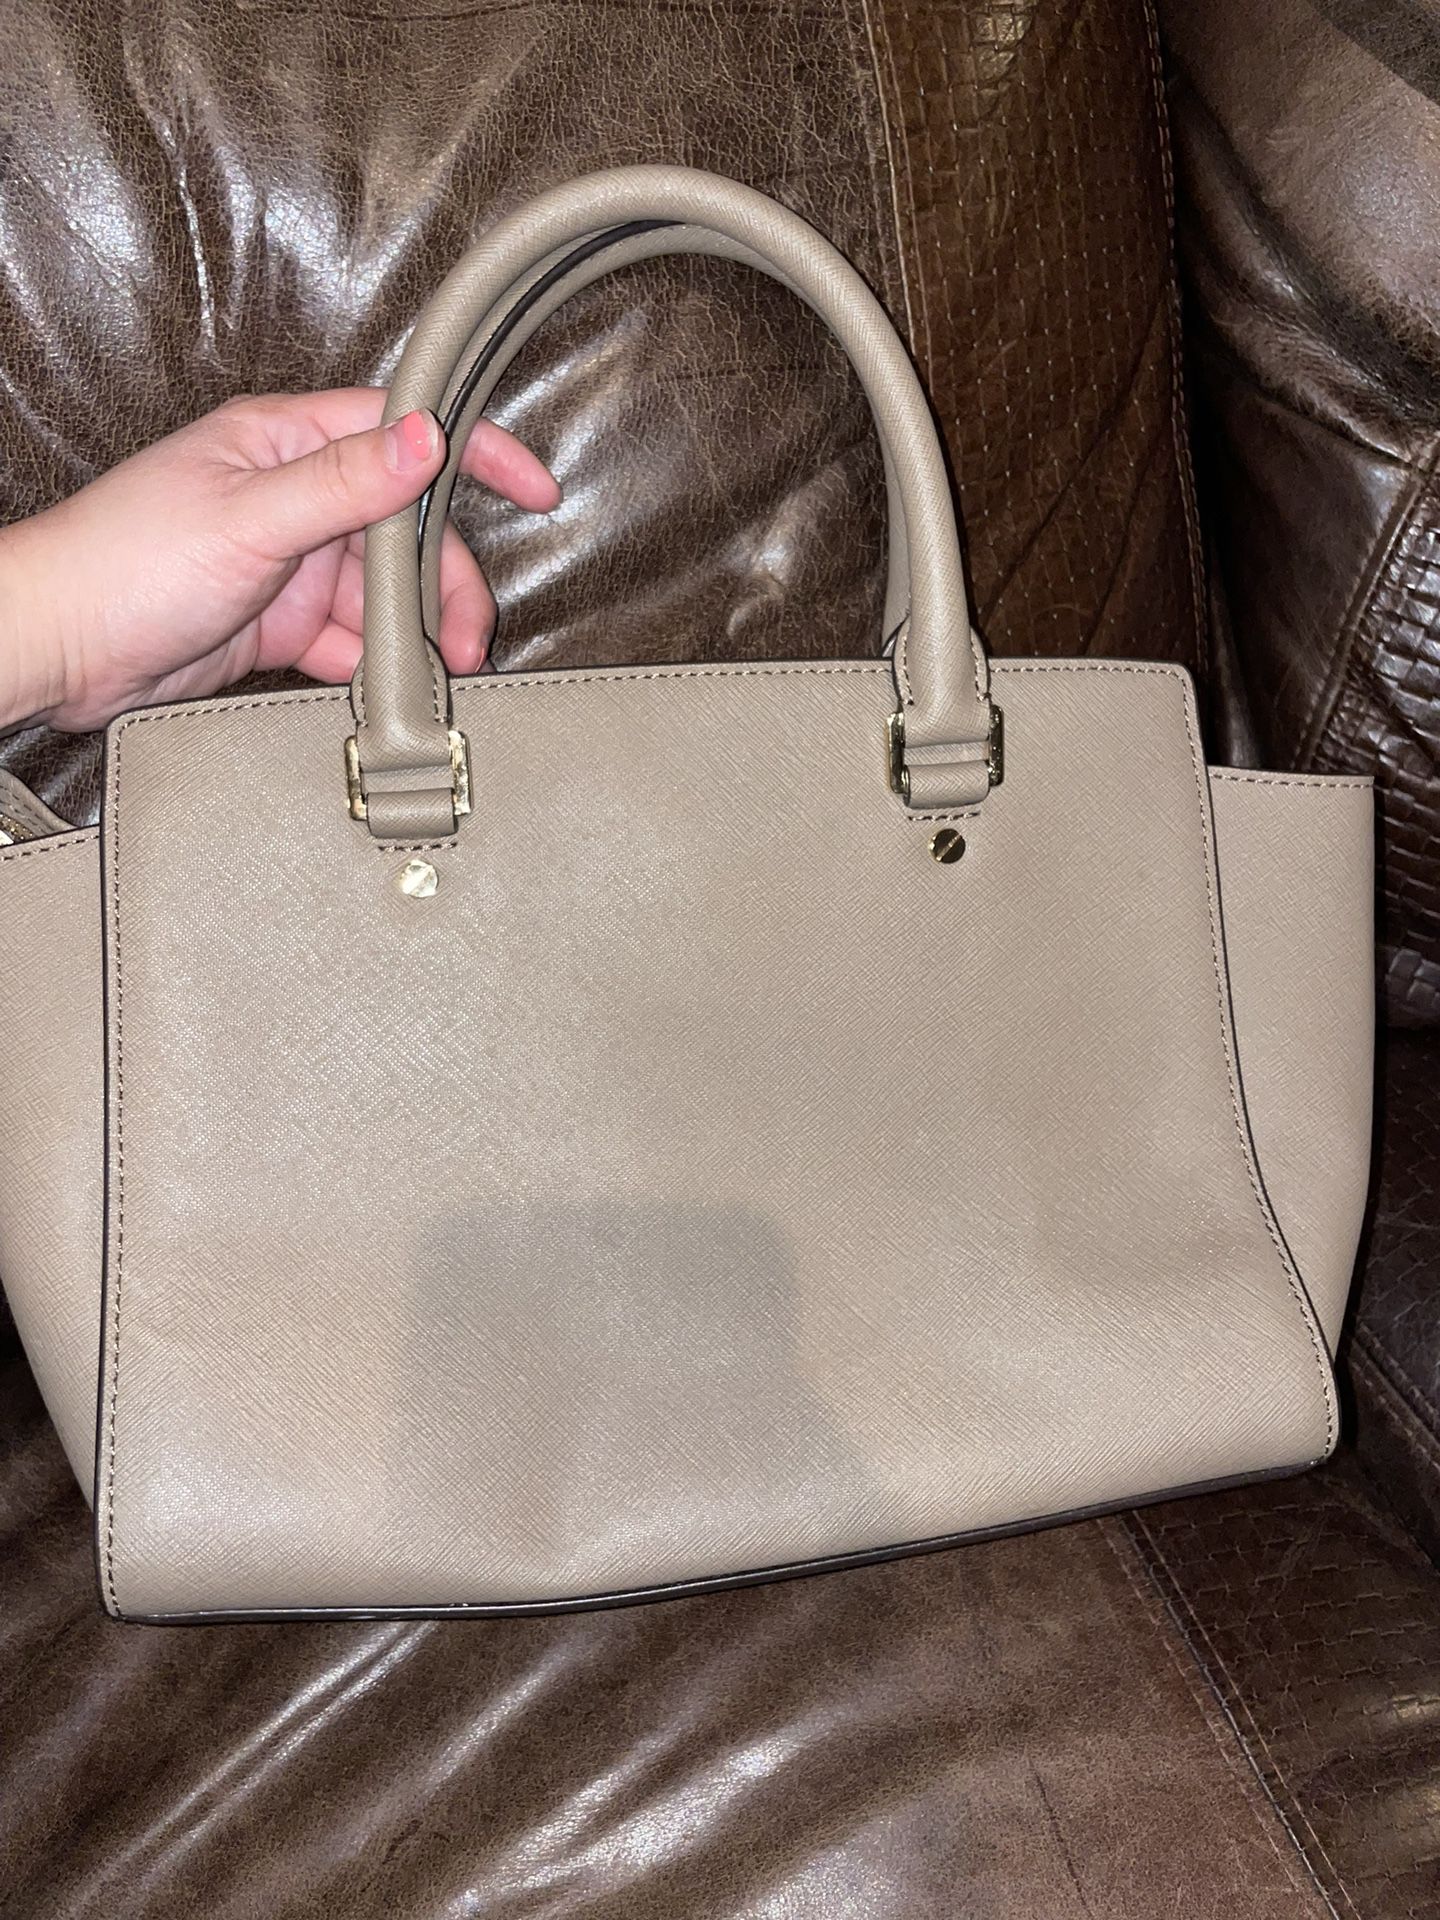 Leather CHANEL purse for Sale in Garden Grove, CA - OfferUp